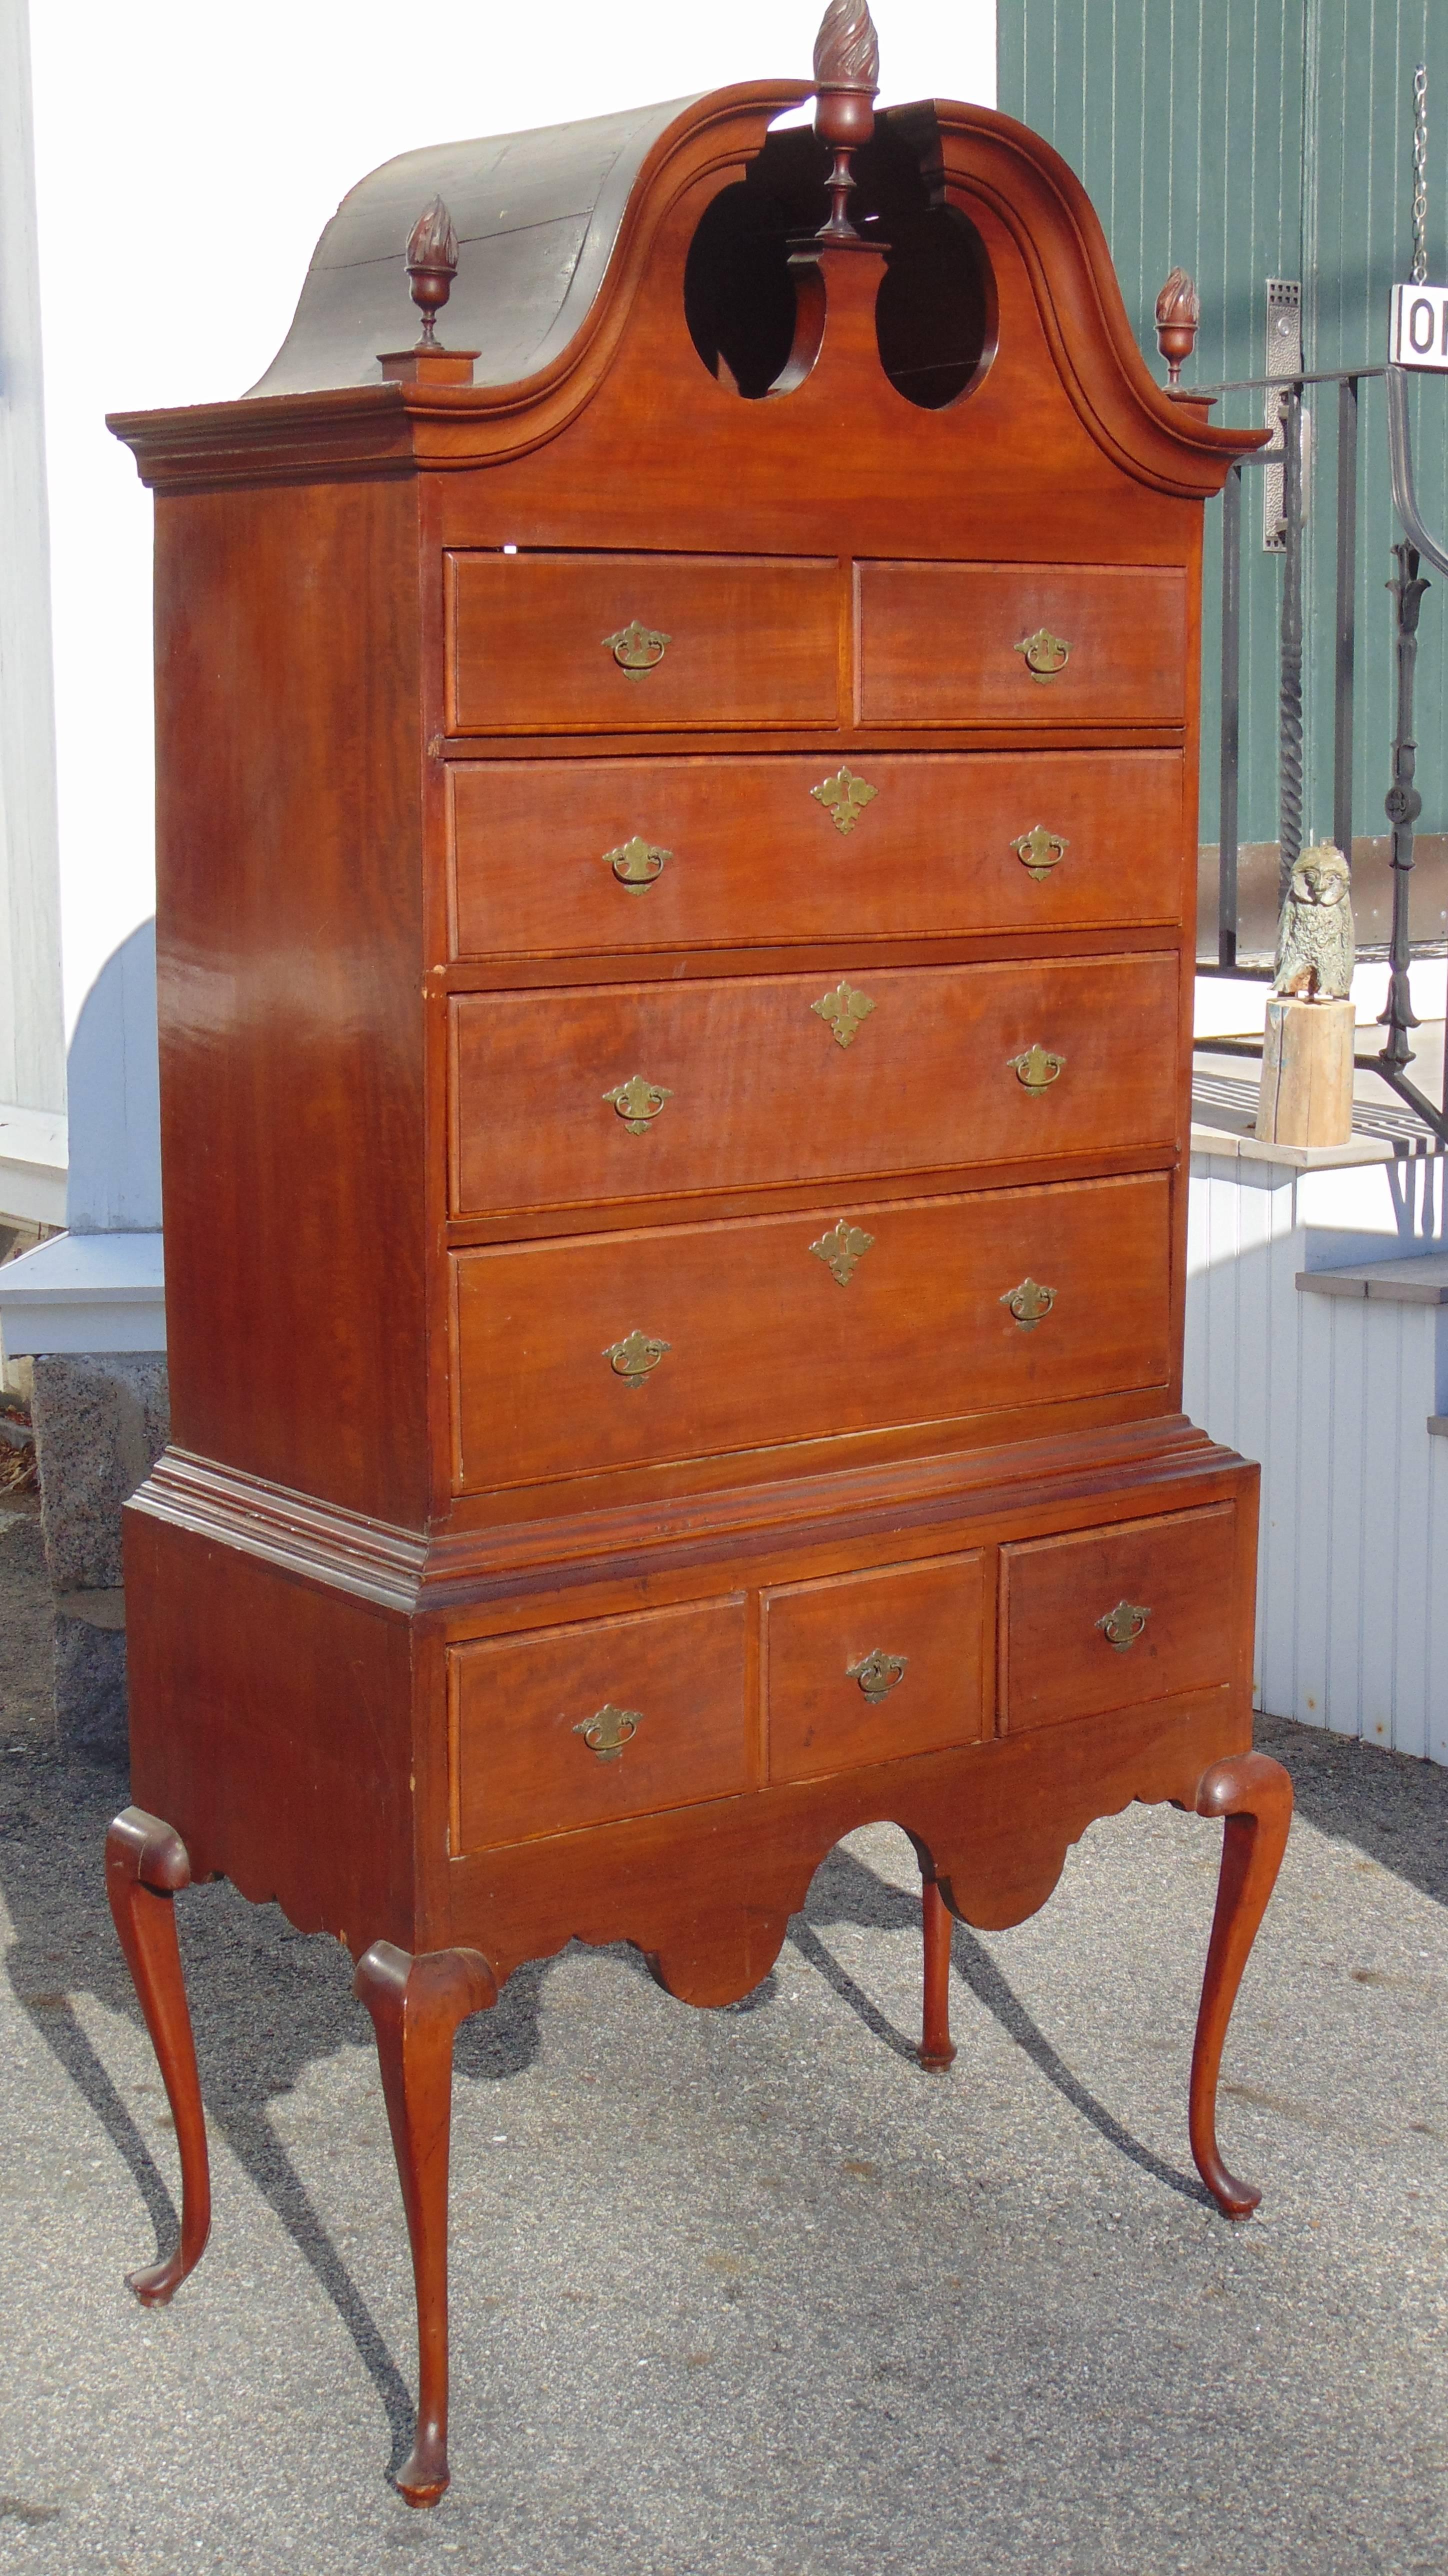 Period American cherry and mixedwood bonnet top highboy.

Queen Anne.
Charming Provincial Form.
New England.
Early Finish.